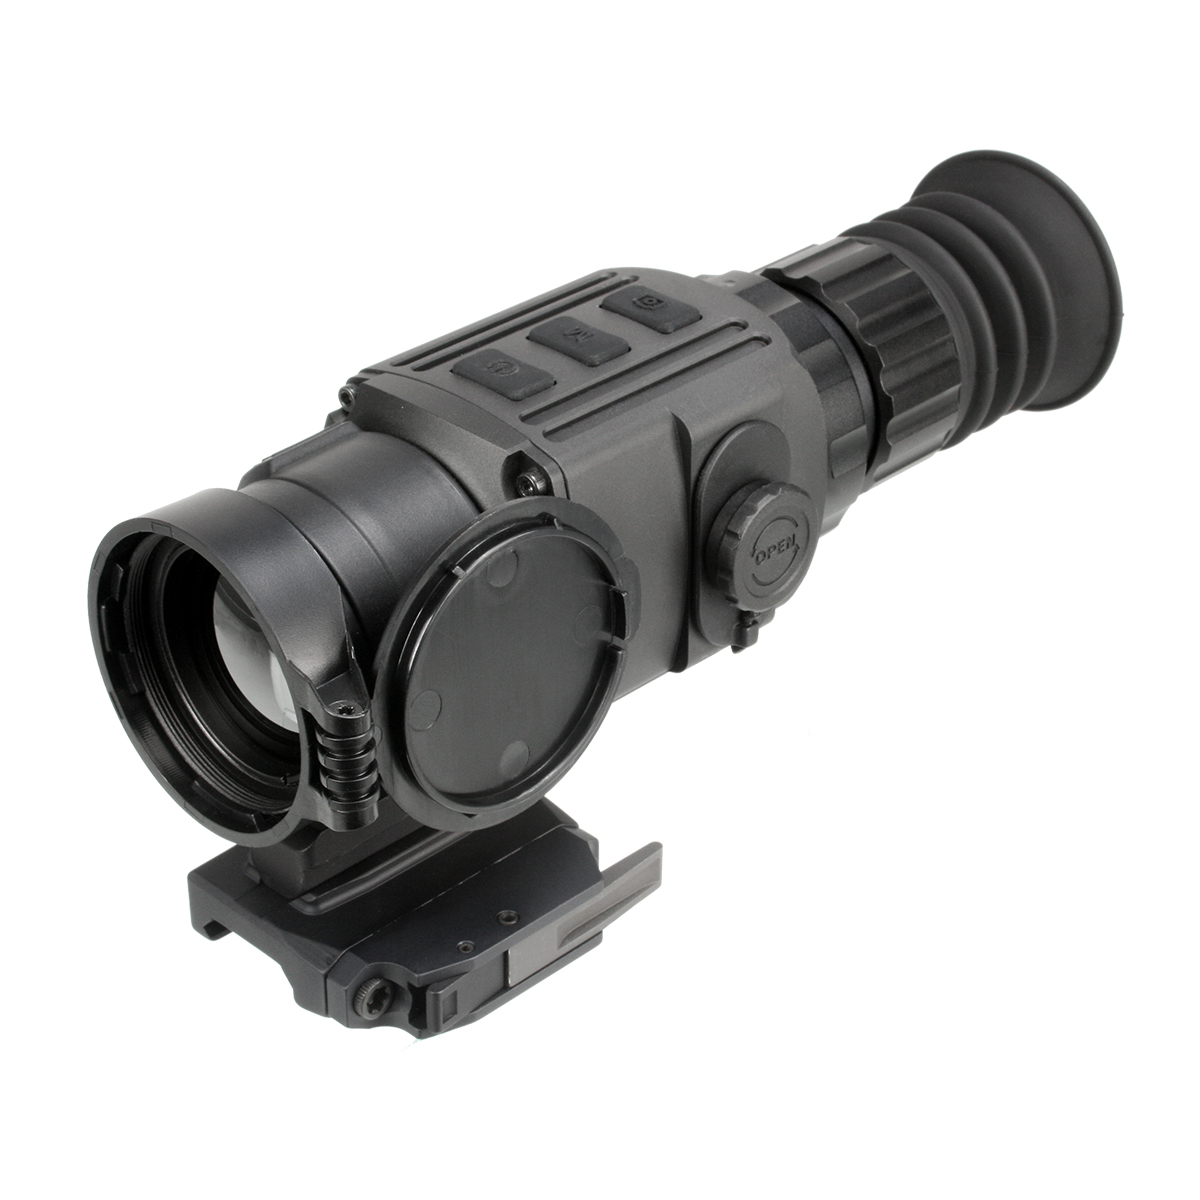 TS-300_Fusion_Thermal Imaging_Rifle_D5_1200